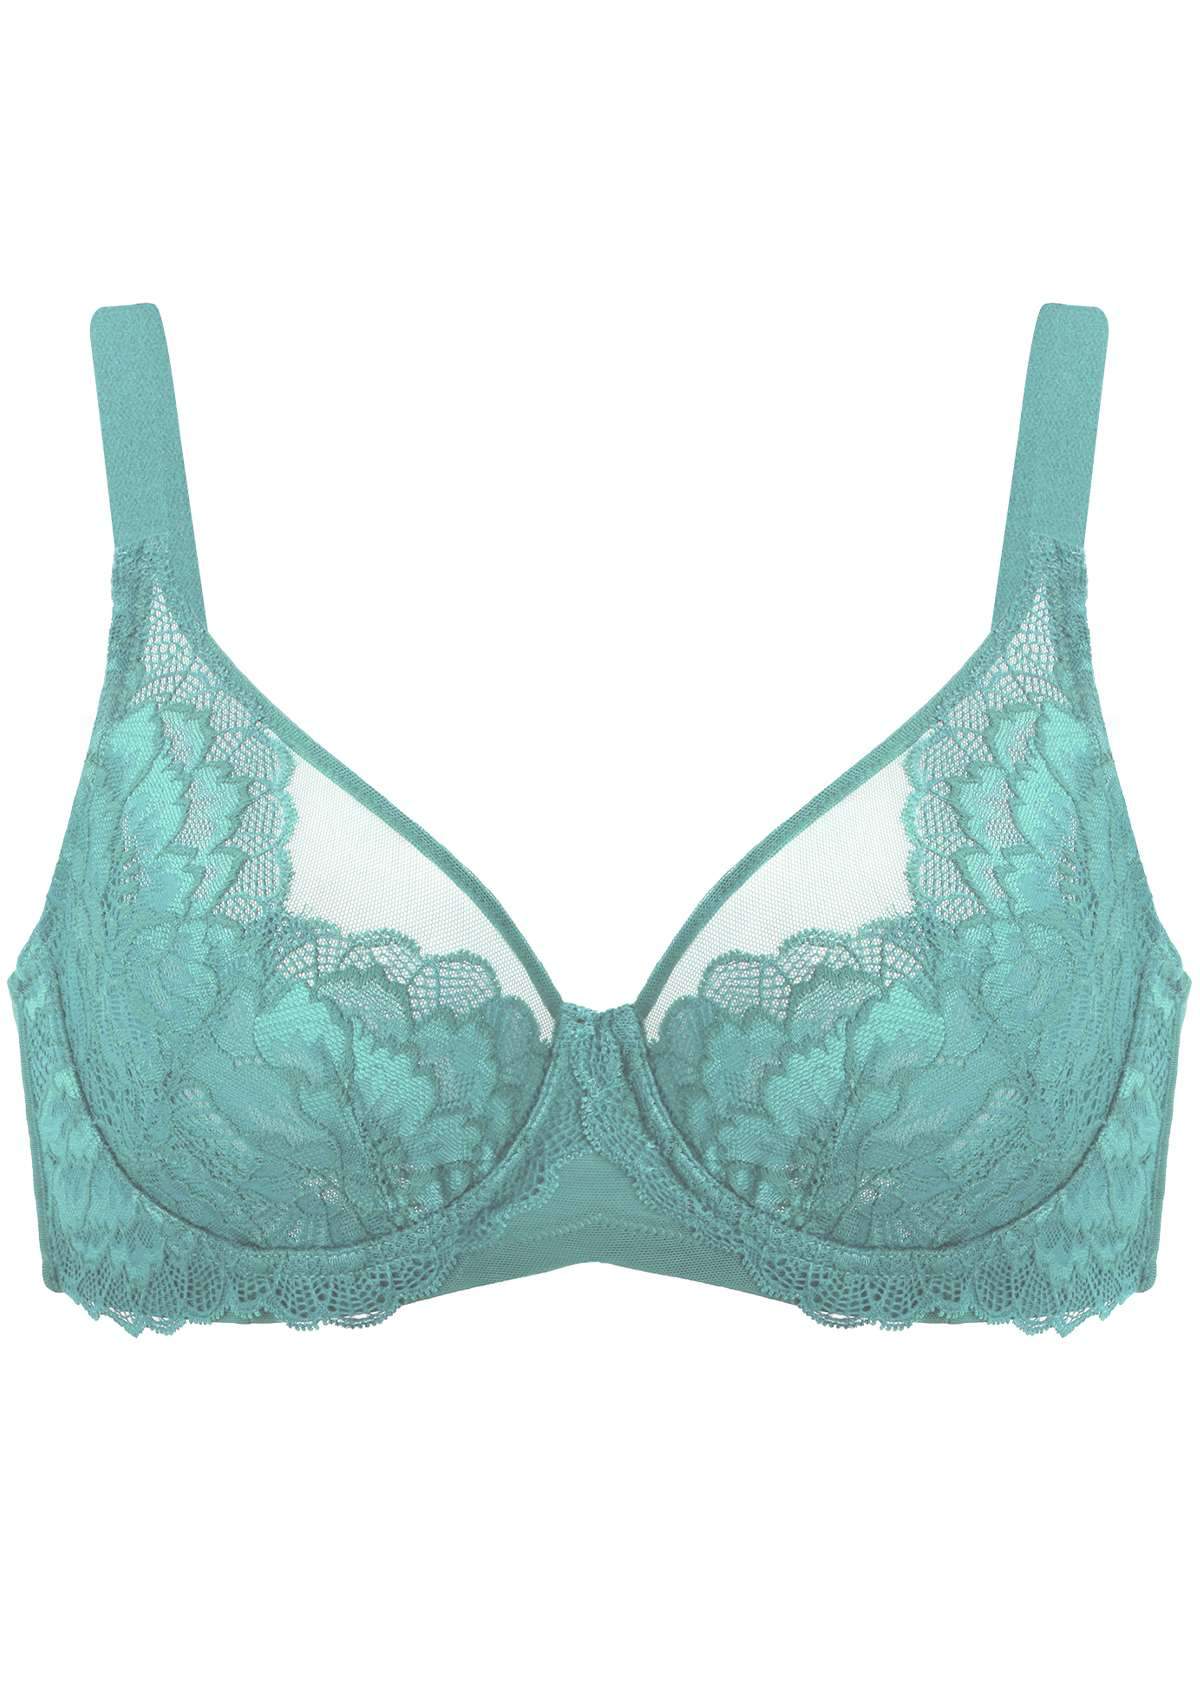 HSIA Peony Lace Unlined Supportive Underwire Bra - Green / 40 / D